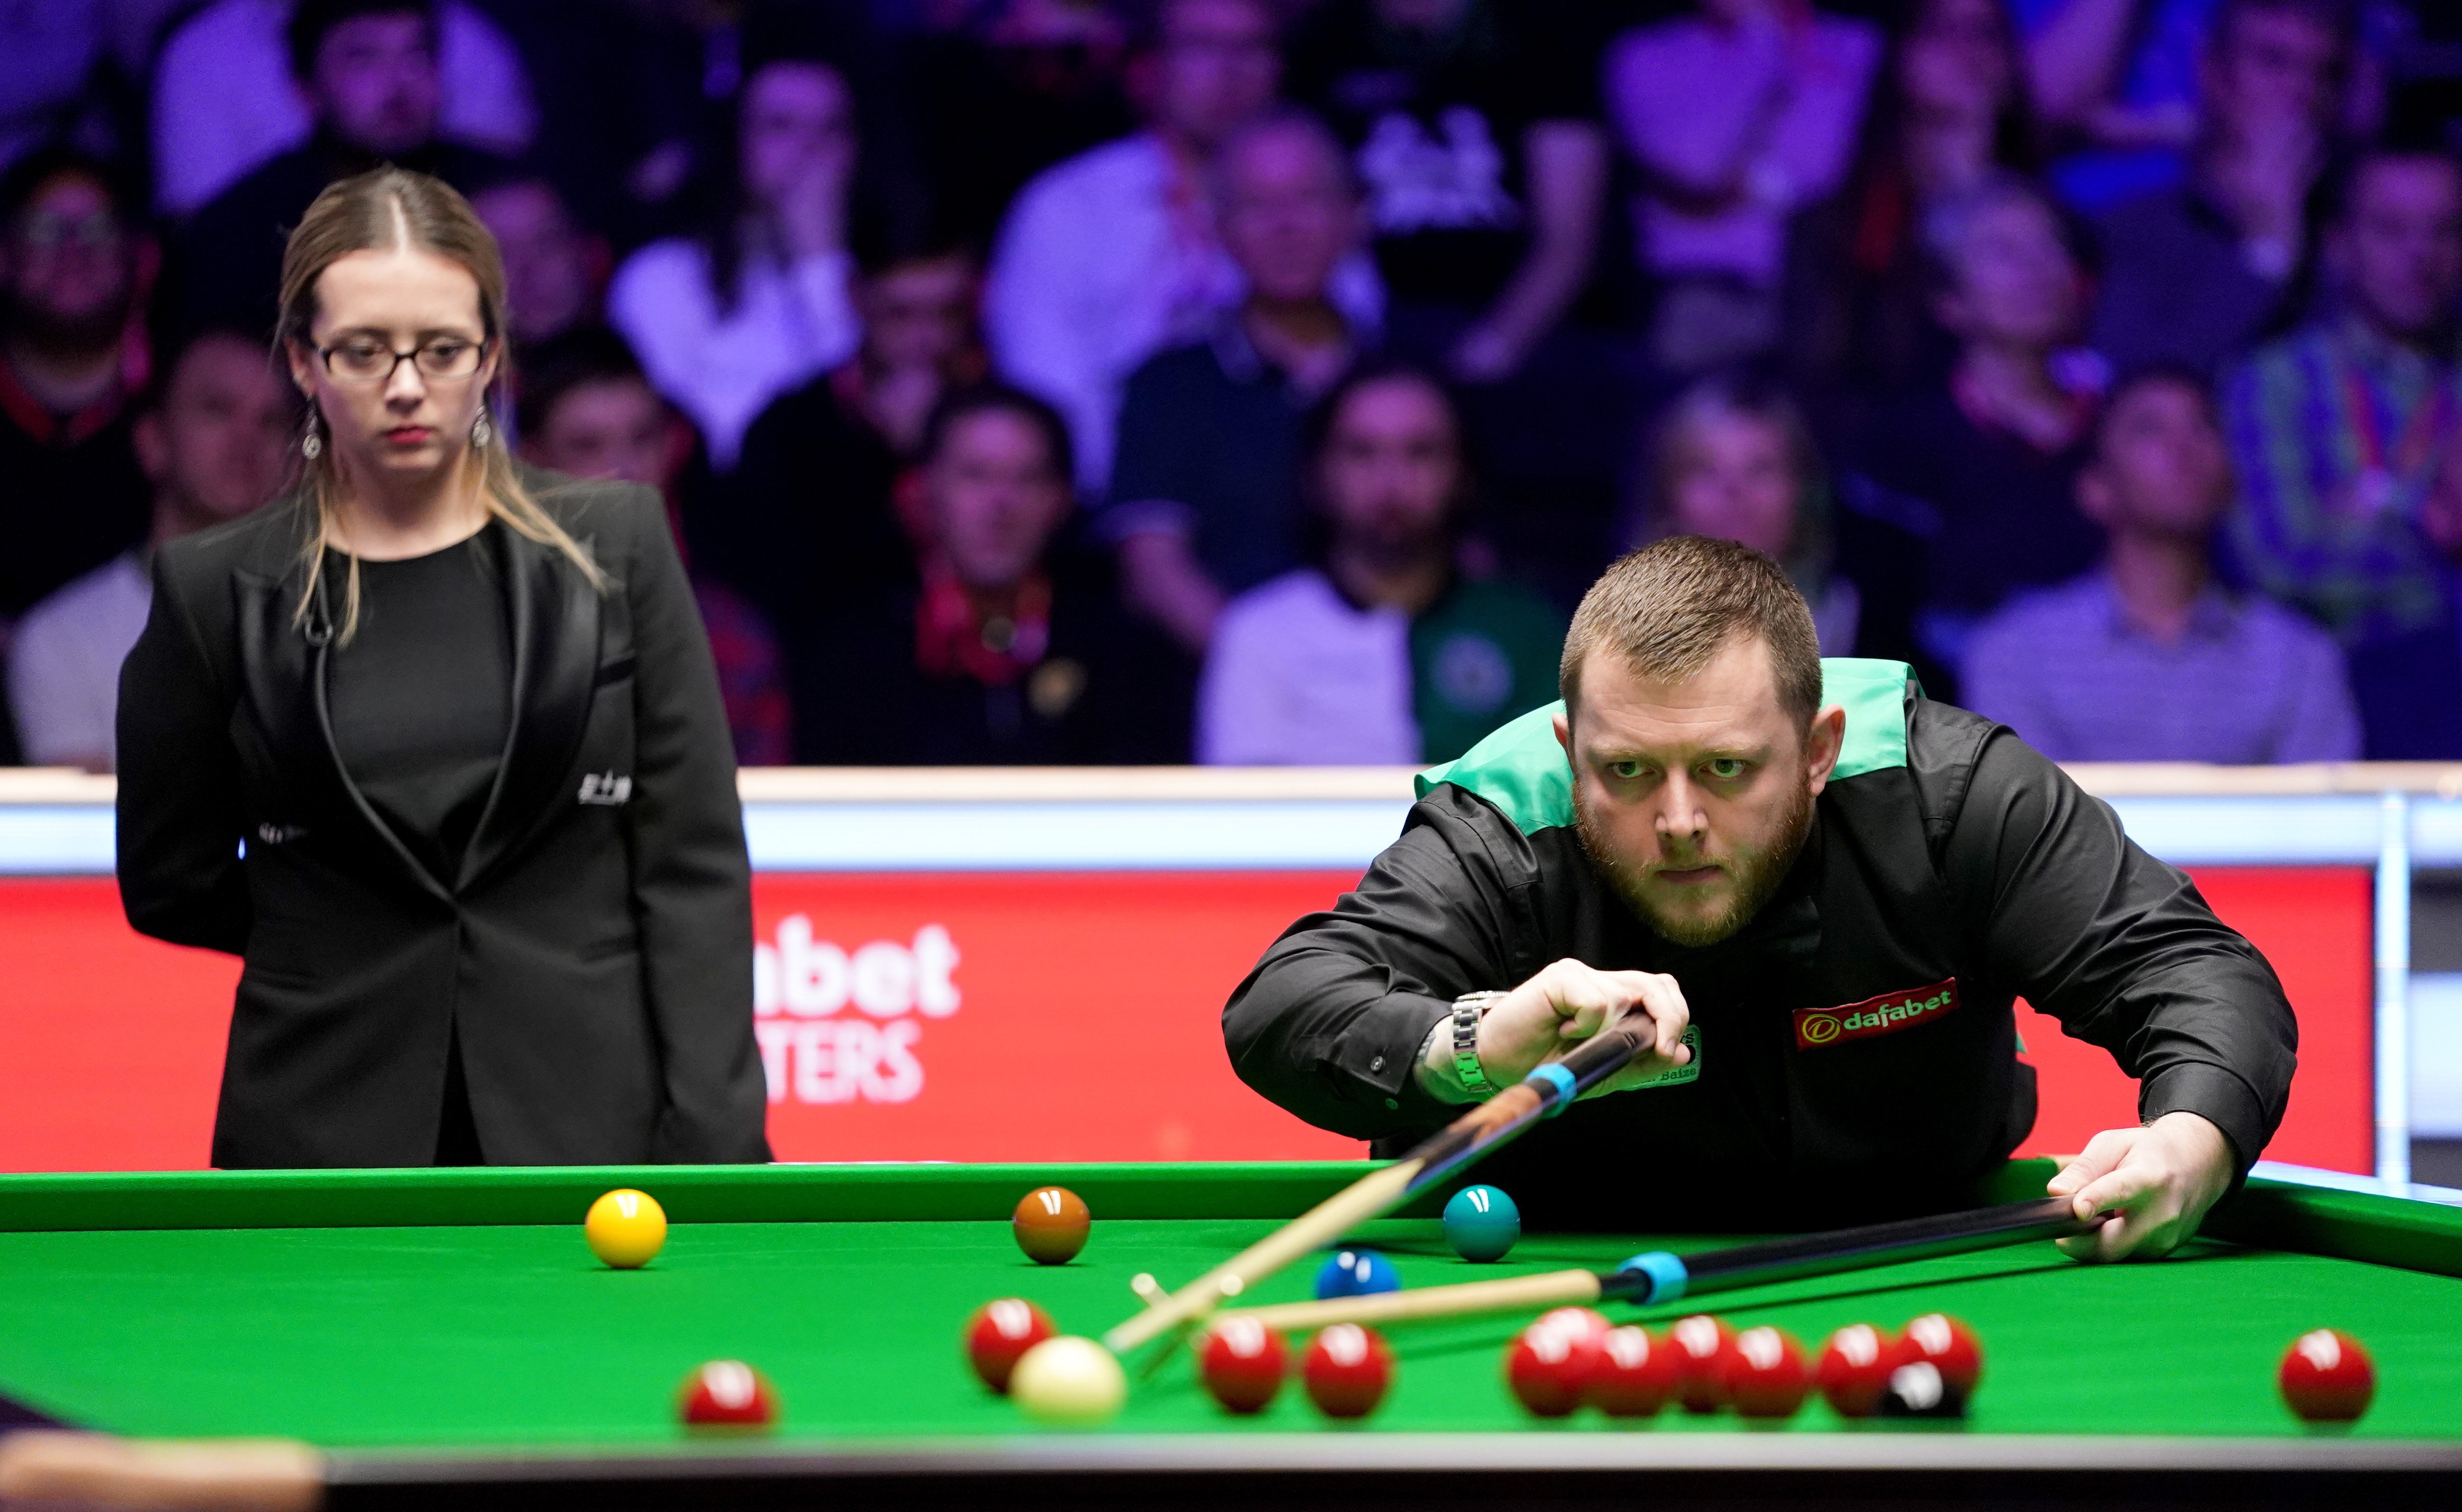 Barry Hearn hails major step forward for snooker as he reveals women referees will be used at new Saudi Arabia Masters, while Amnesty condemn move as PR stunt World of Womens